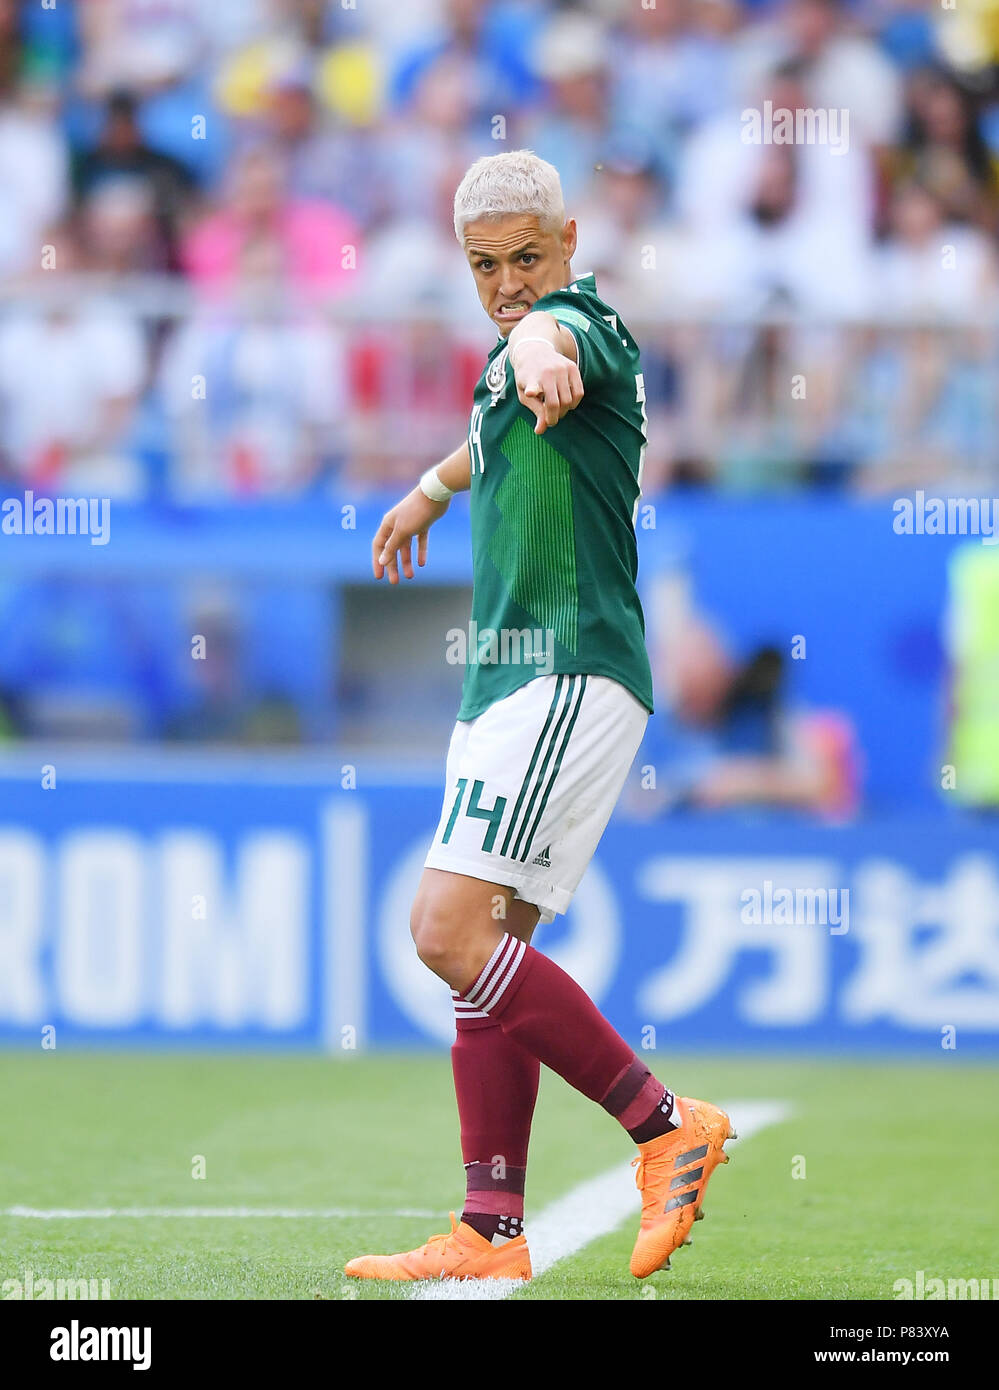 SAMARA, RUSSIA - JULY 02: Javier Hernandez of Mexico reacts during the 2018 FIFA World Cup Russia Round of 16 match between Brazil and Mexico at Samara Arena on July 2, 2018 in Samara, Russia. (Photo by Lukasz Laskowski/PressFocus/MB Media) Stock Photo